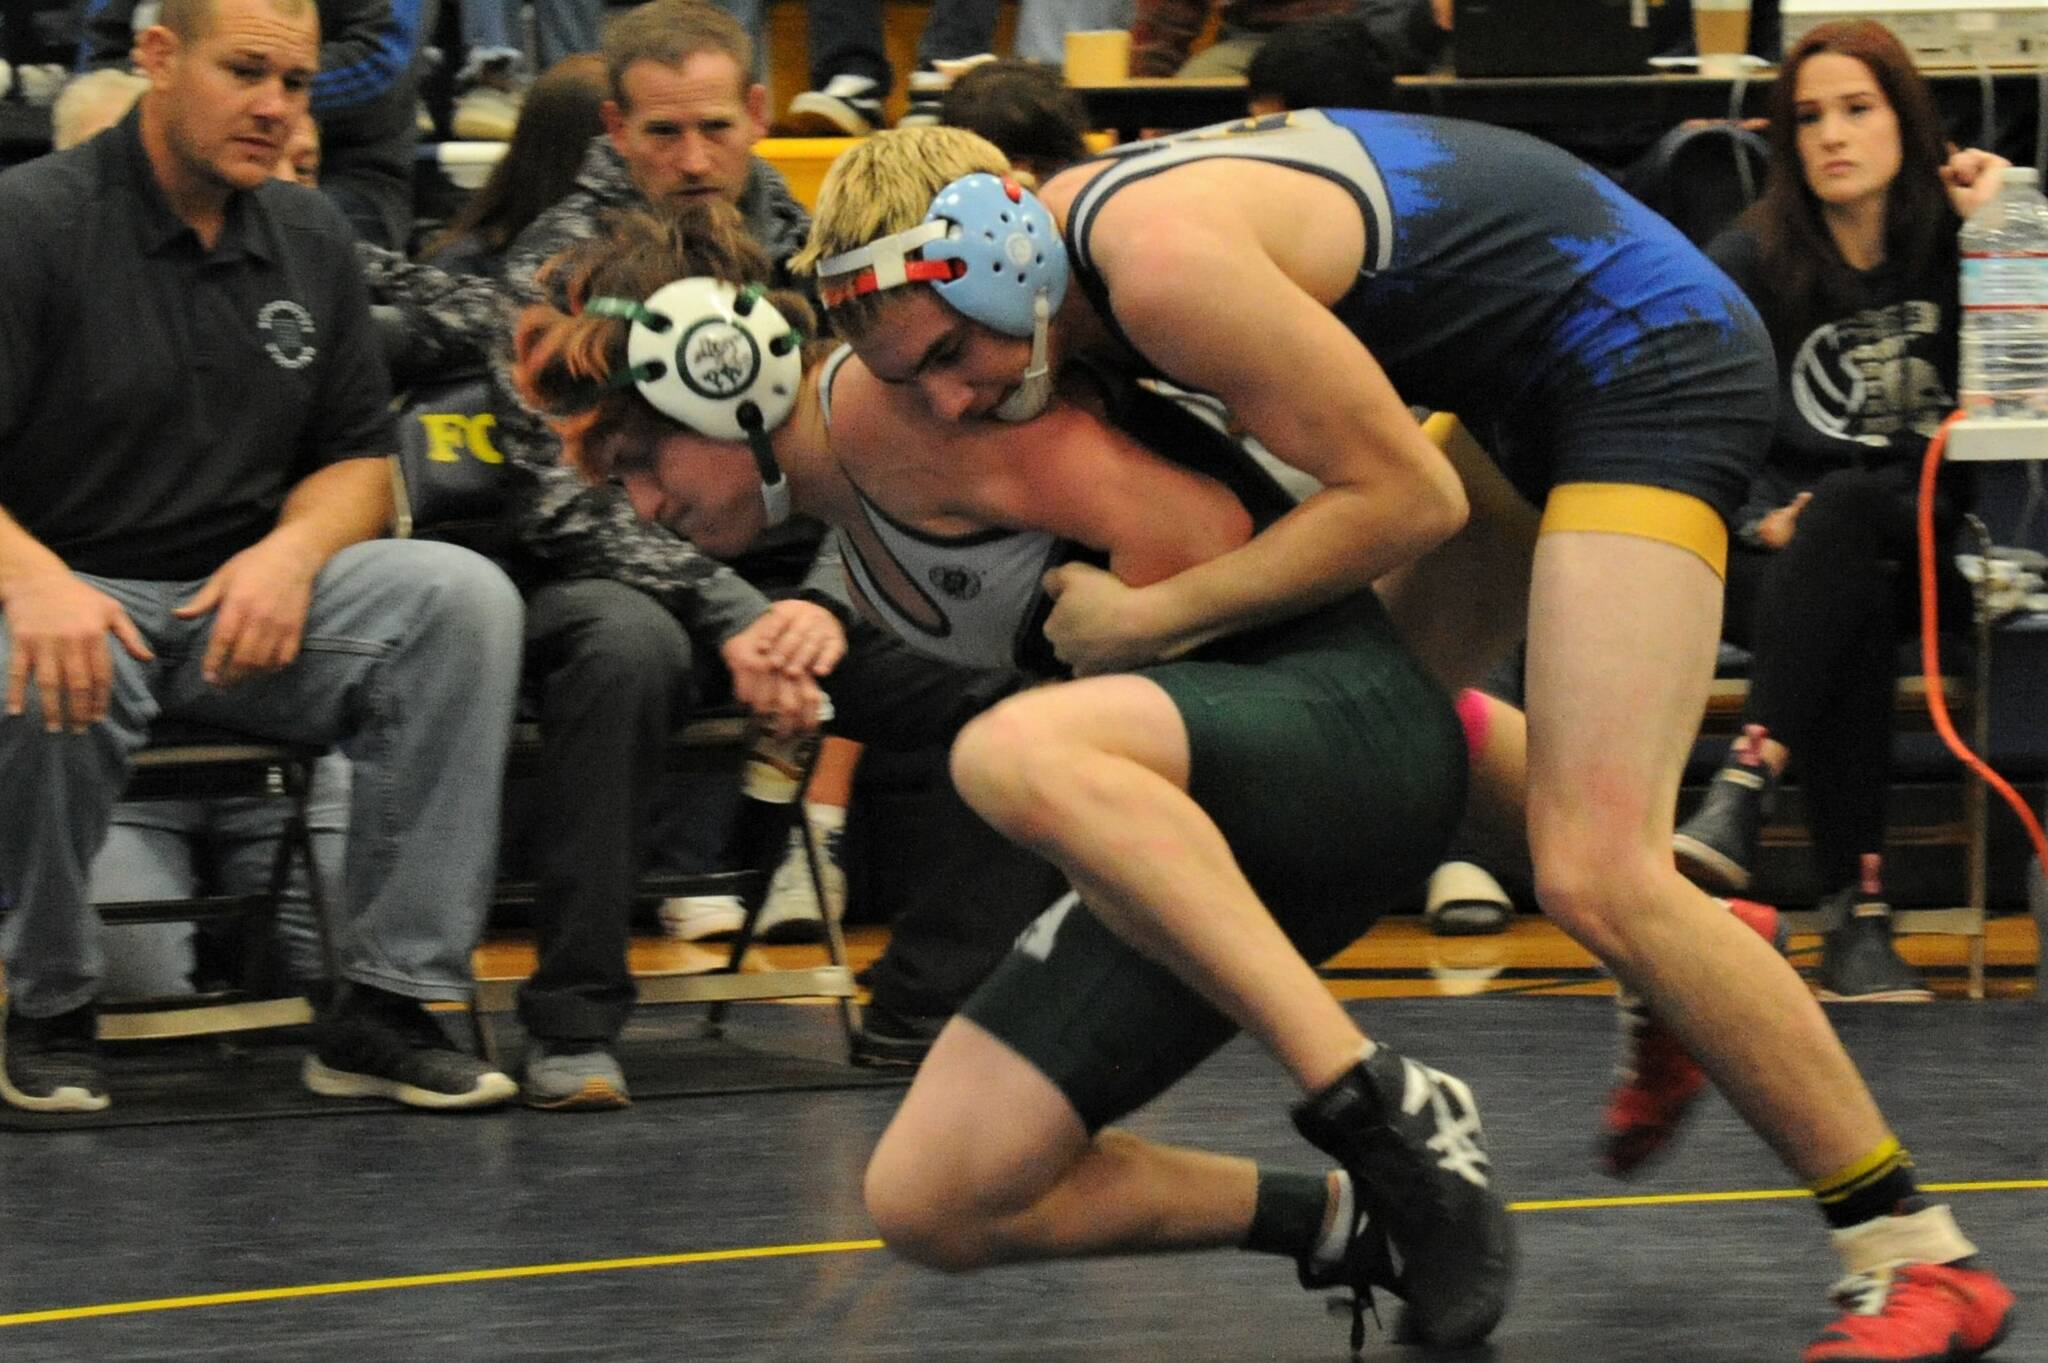 Forks Walker Rondeau defeated Lyman of Port Angeles 16 to 0 in the 138 lb class.